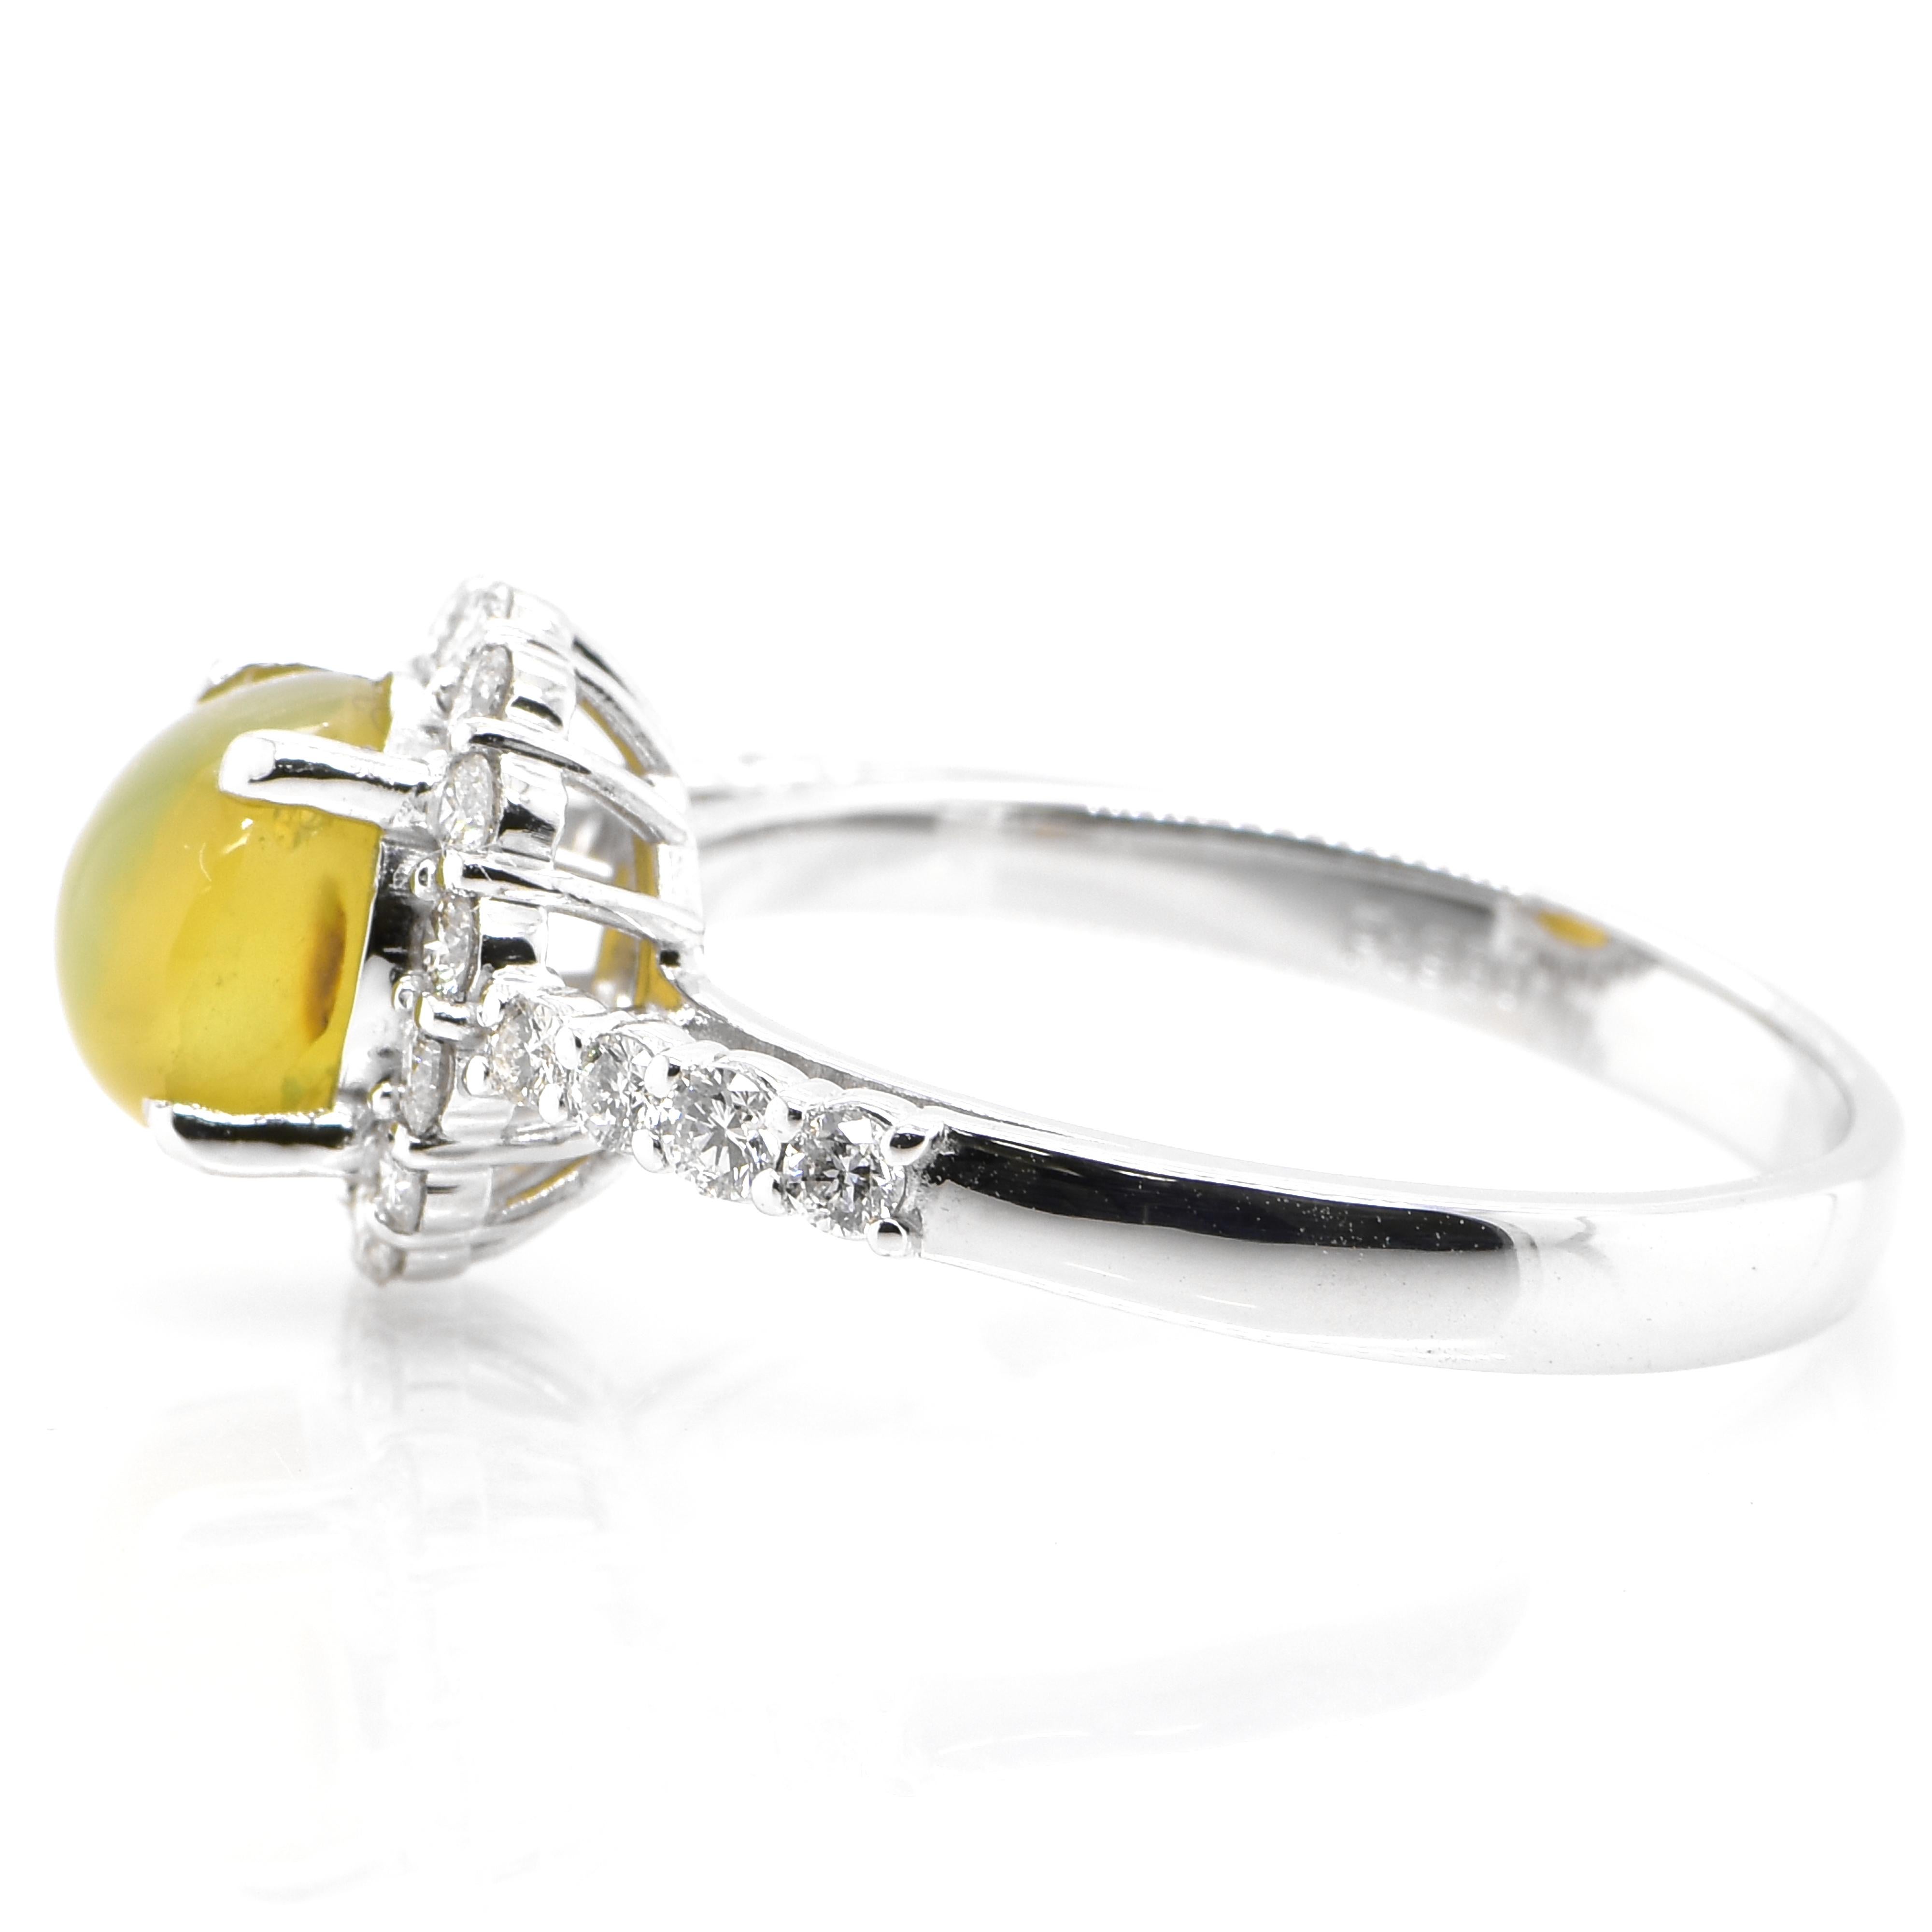 Cabochon 2.29 Carat 'Honey-Color' Cat's Eye Chrysoberyl and Diamond Ring Set in Platinum For Sale